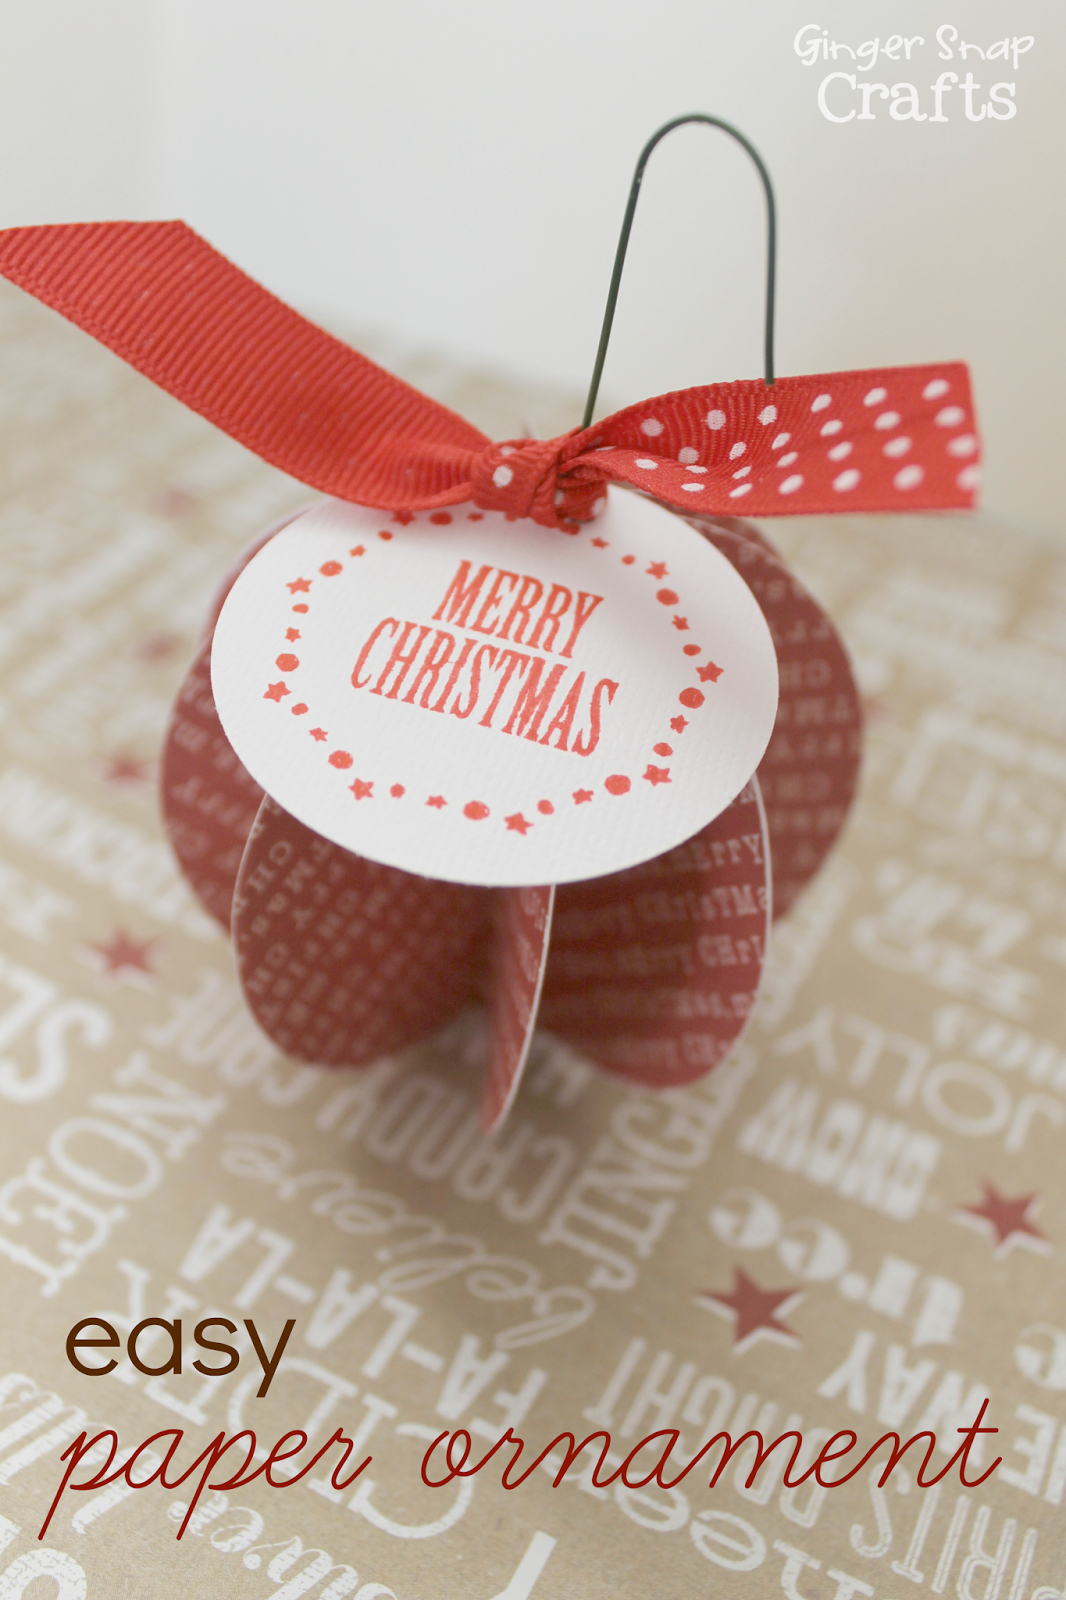 Simple and Easy Christmas Scrapbook Paper Crafts Easy Paper Ornament Ginger Snap Crafts Lines Across